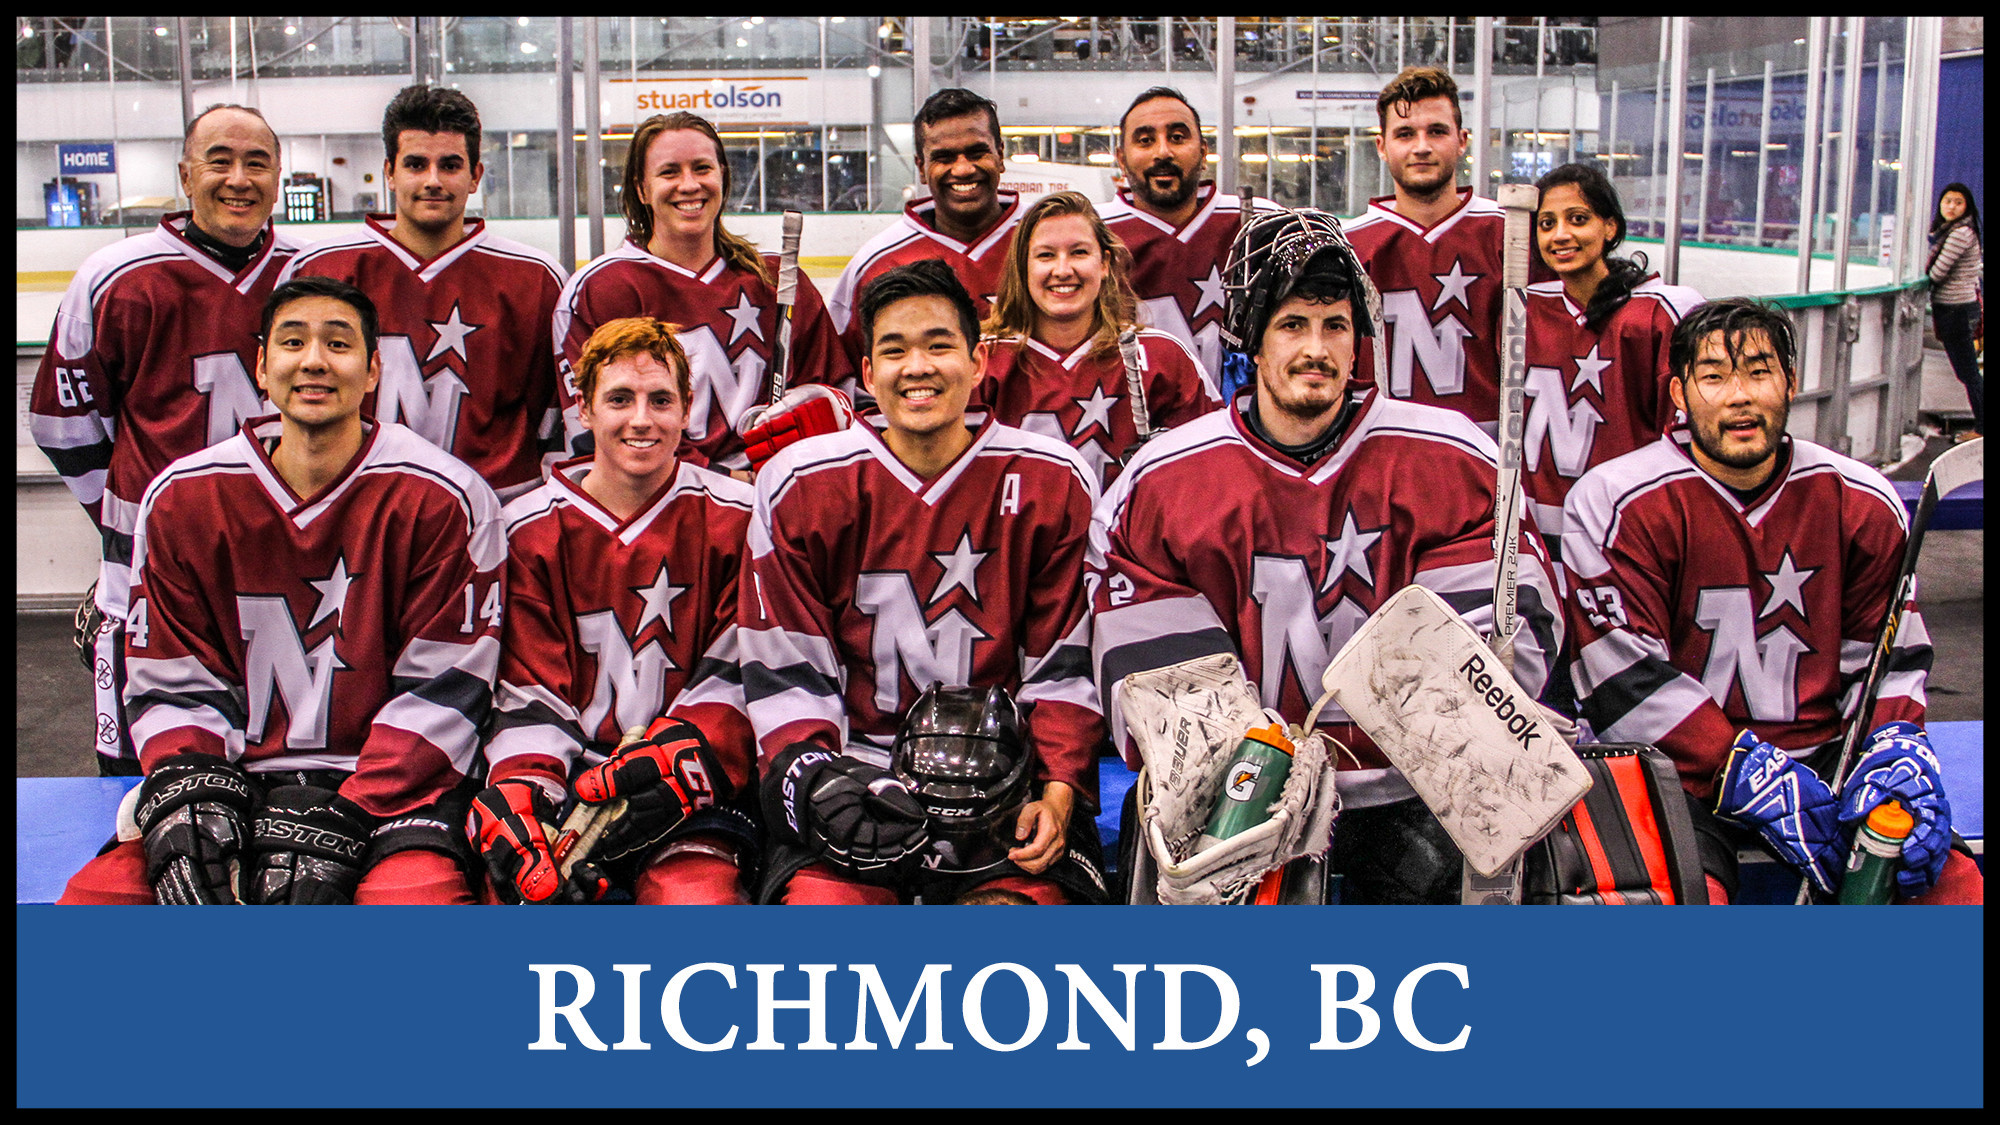 Hockey in Richmon, Greater Vancouver, League team and player registration, stats, schedules. For men and women to play hockey in a fun and safe environment.